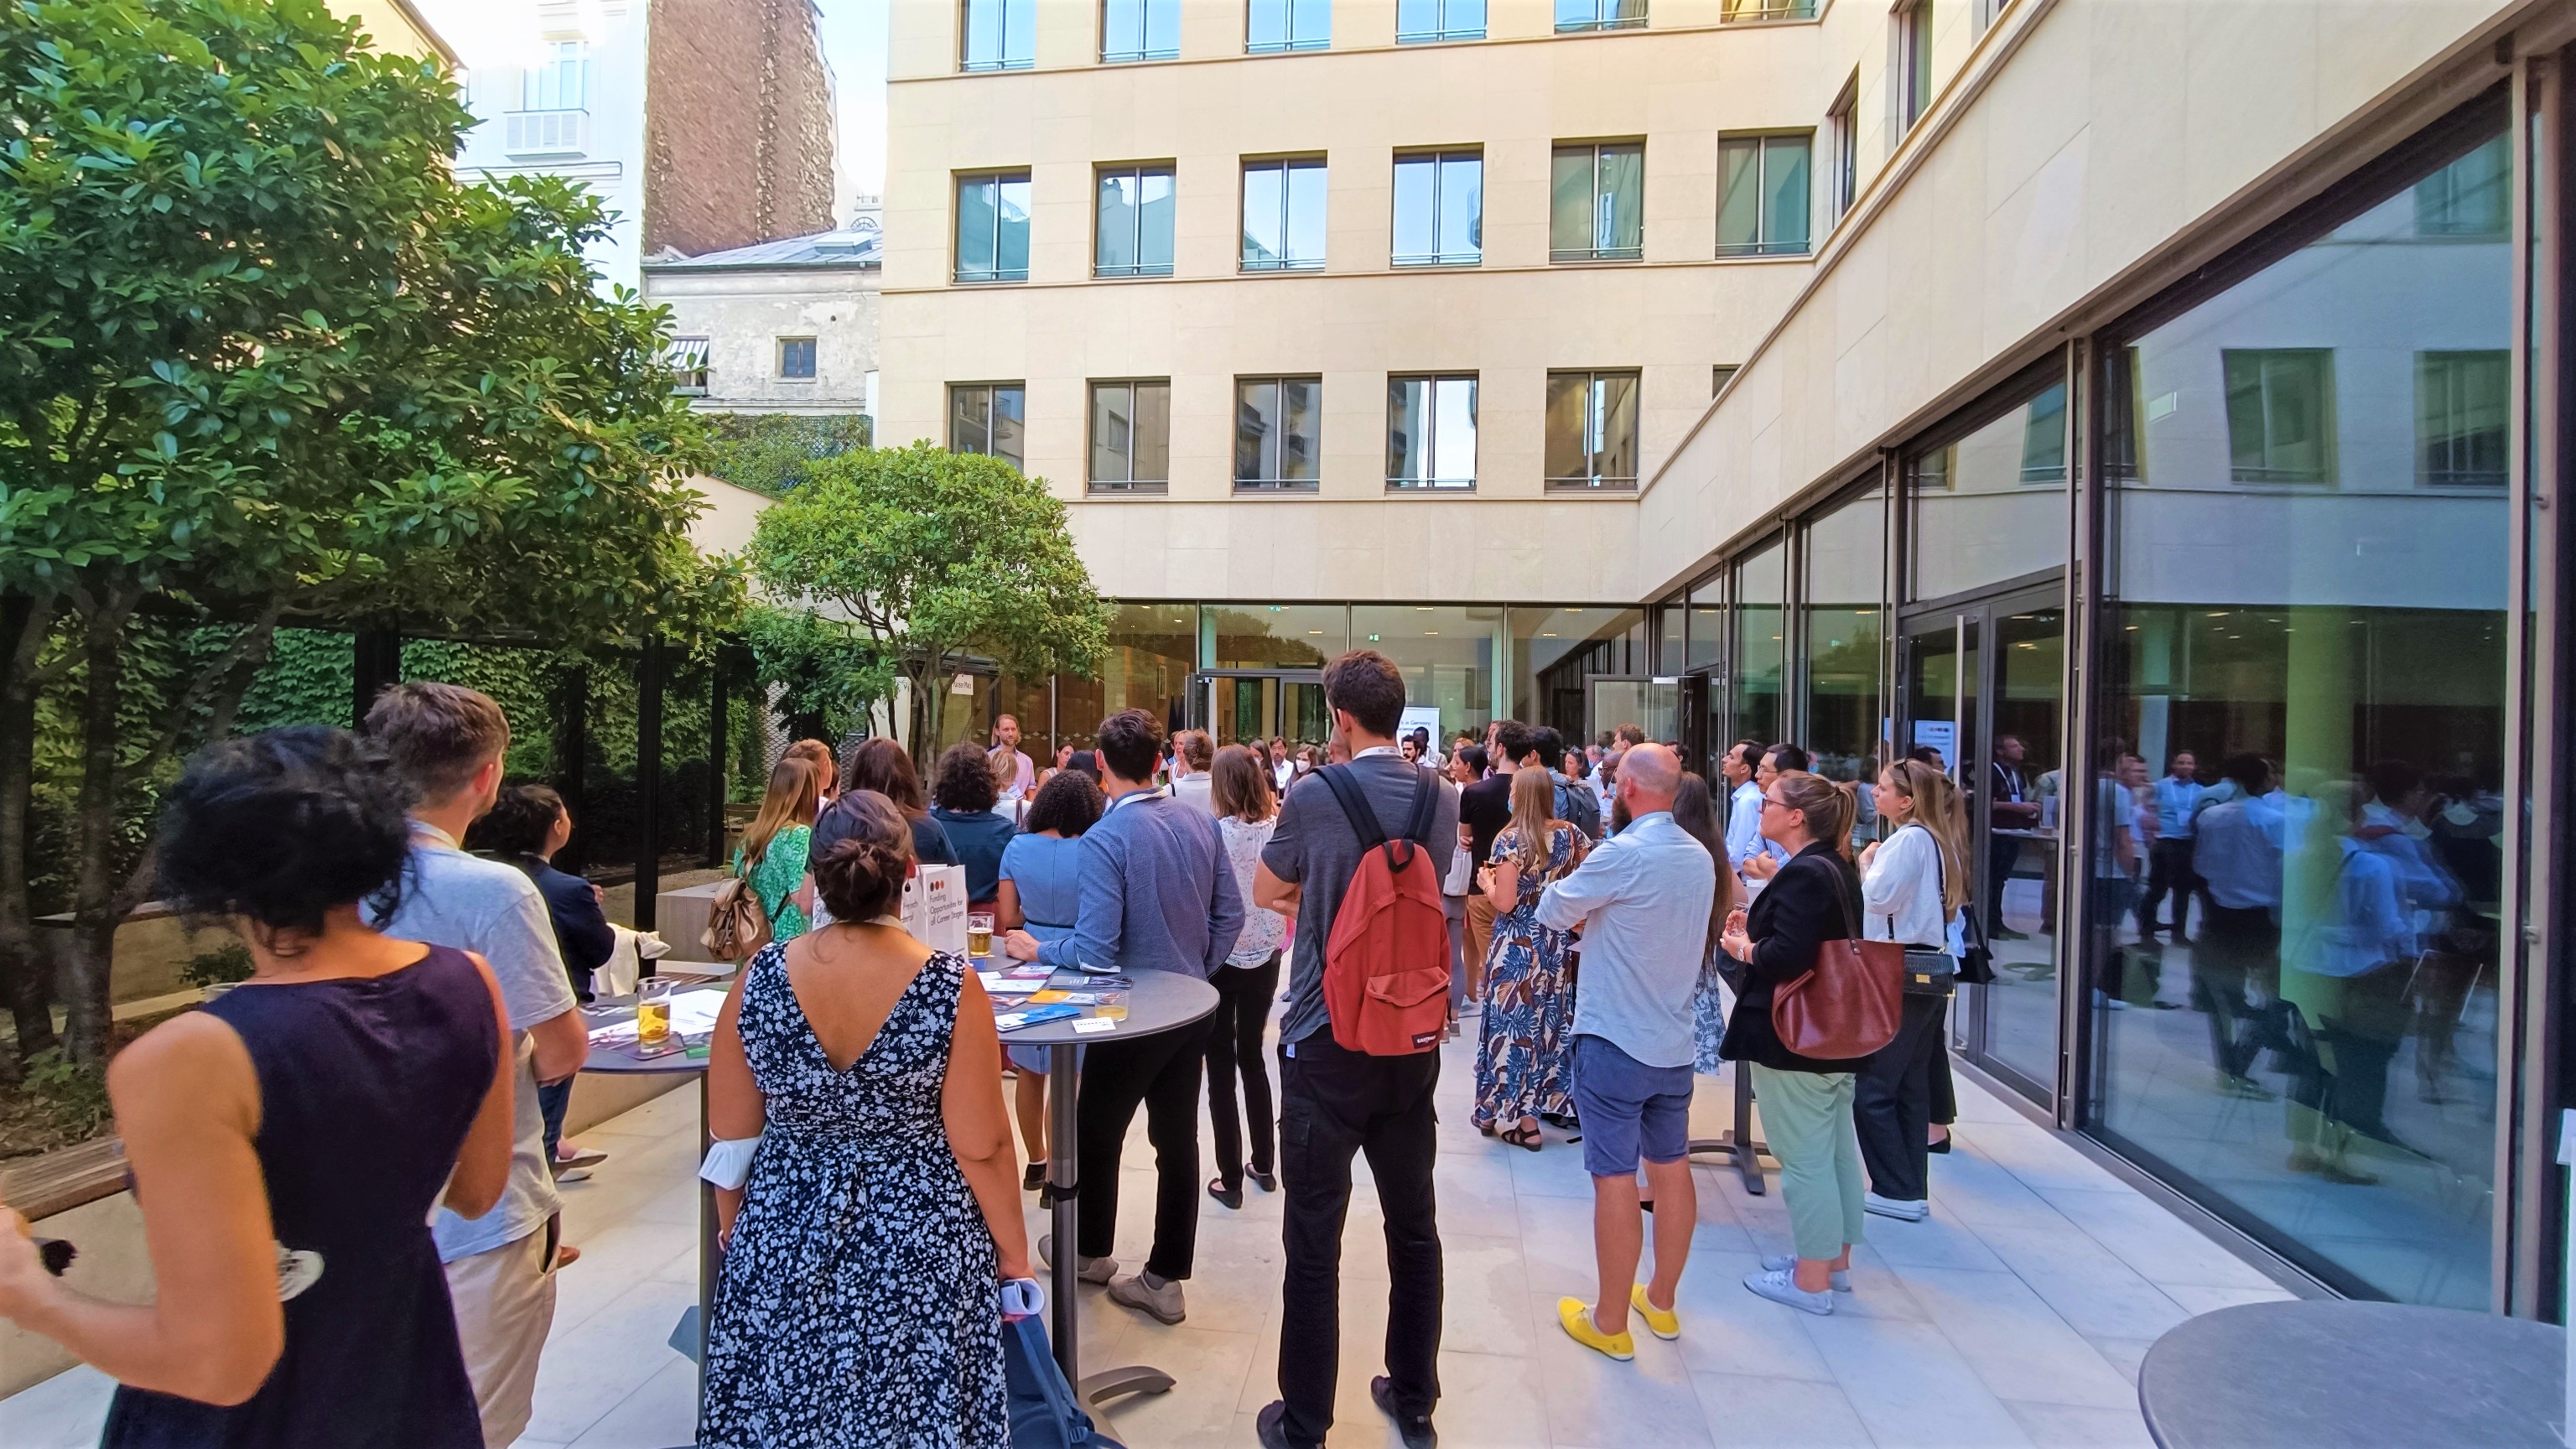 Evening atmosphere at the German Embassy networking event in Paris